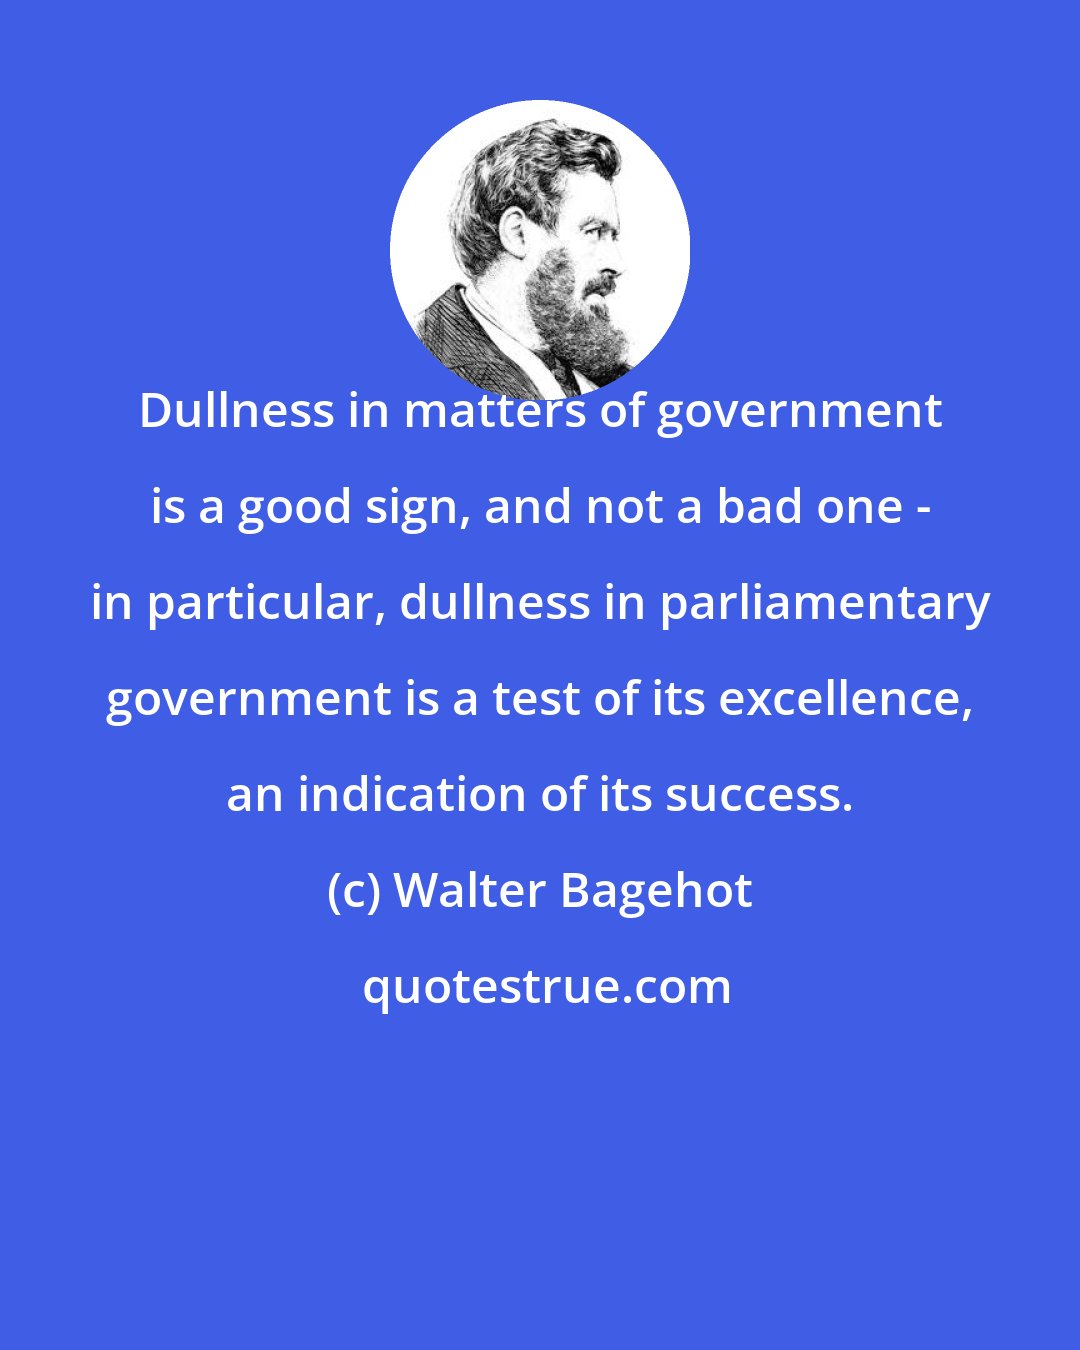 Walter Bagehot: Dullness in matters of government is a good sign, and not a bad one - in particular, dullness in parliamentary government is a test of its excellence, an indication of its success.